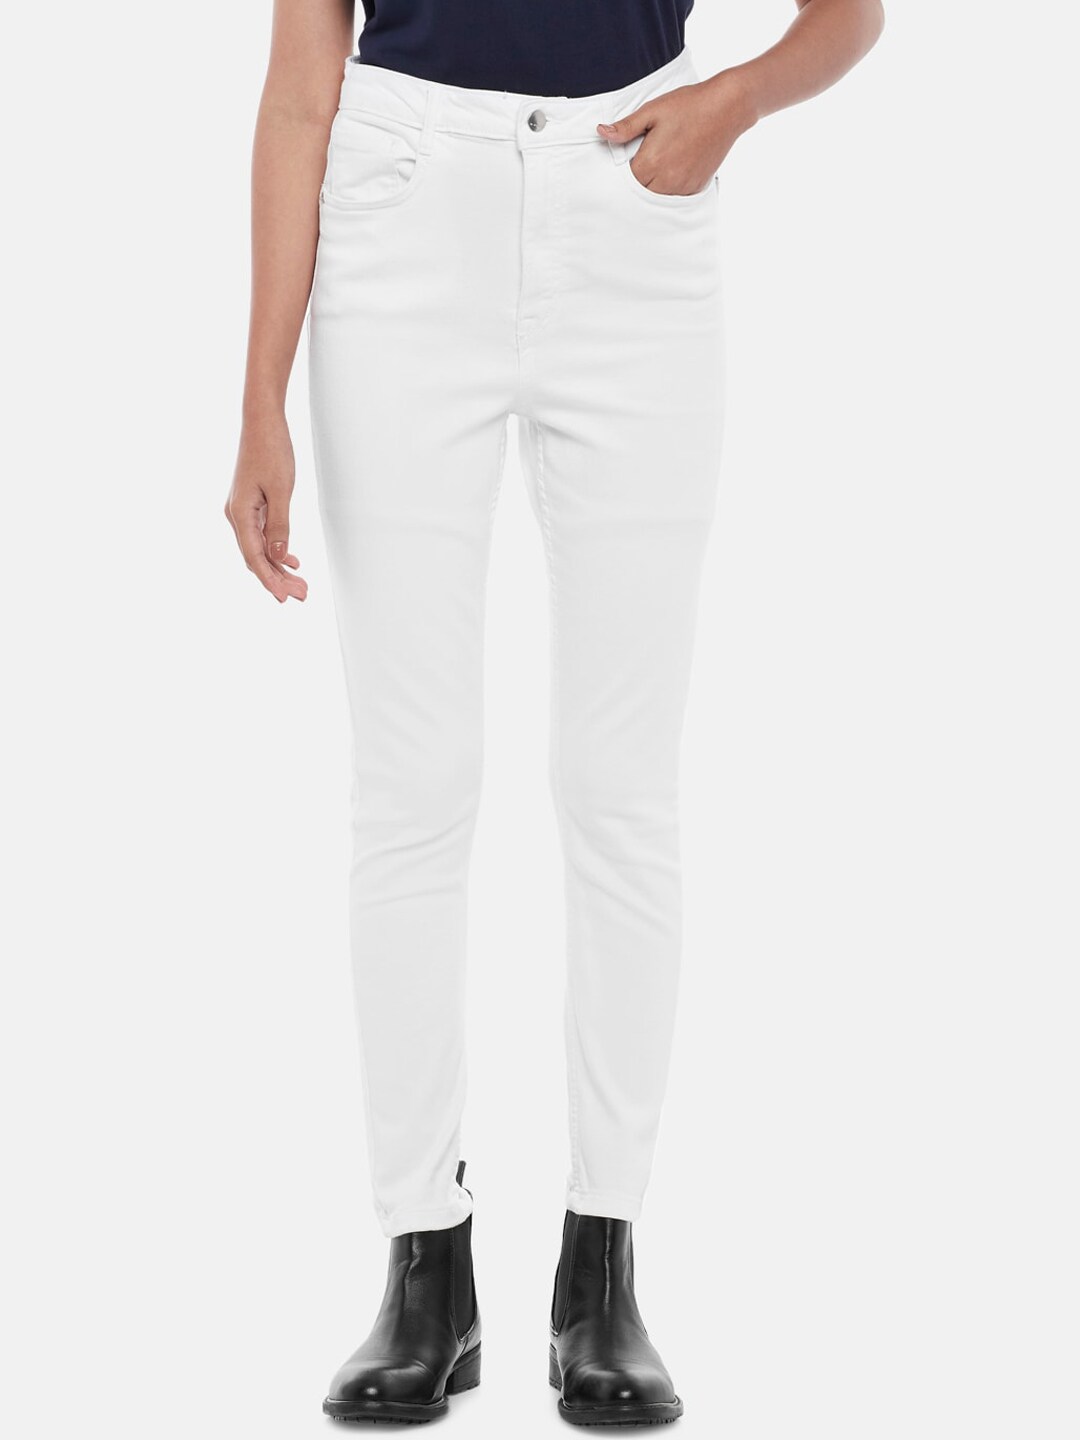 SF JEANS by Pantaloons Women White Skinny Fit High-Rise Jeans Price in India